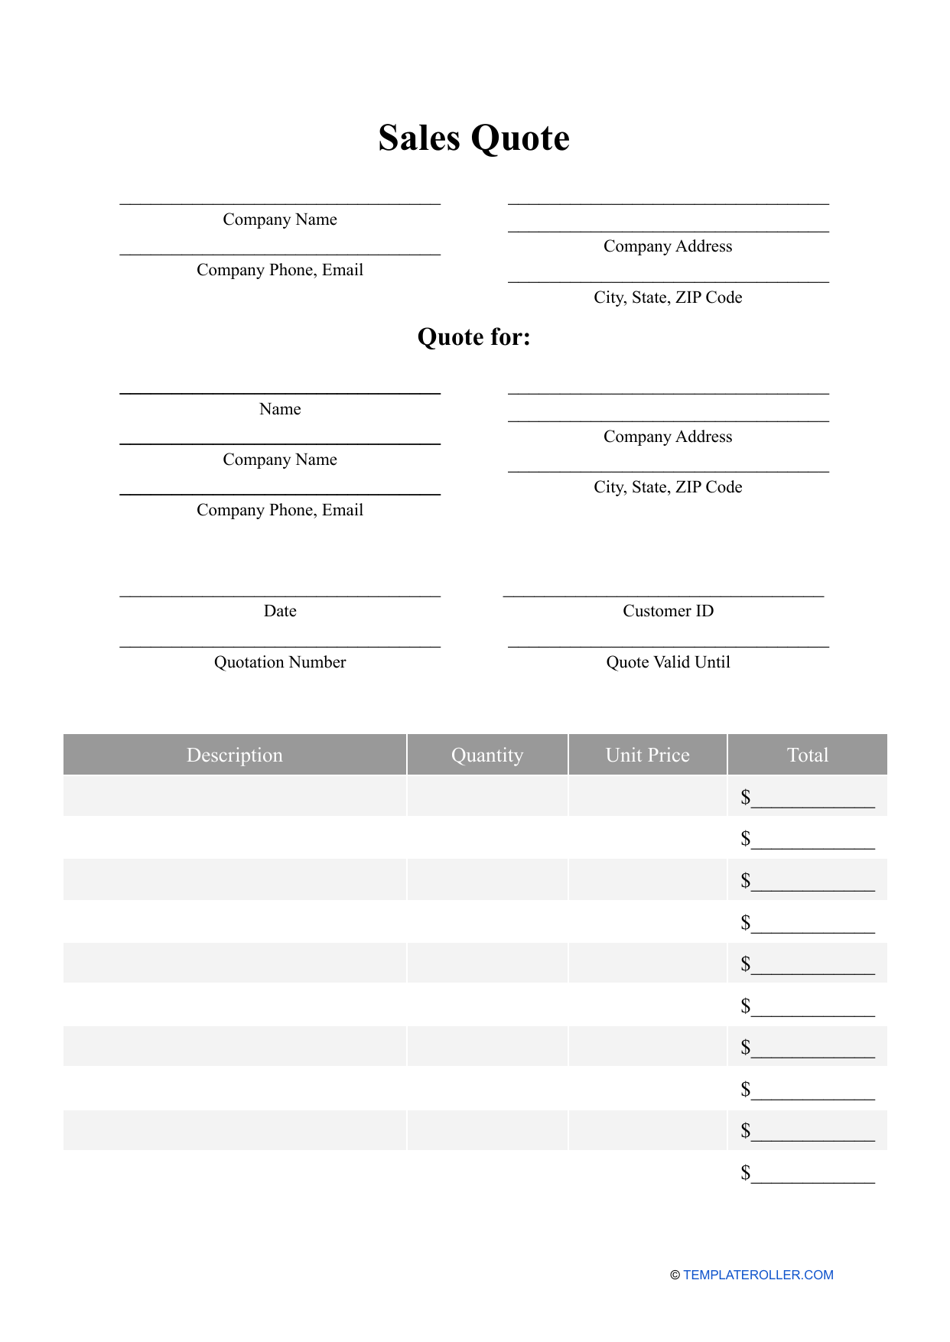 Sales Quote Template, Page 1